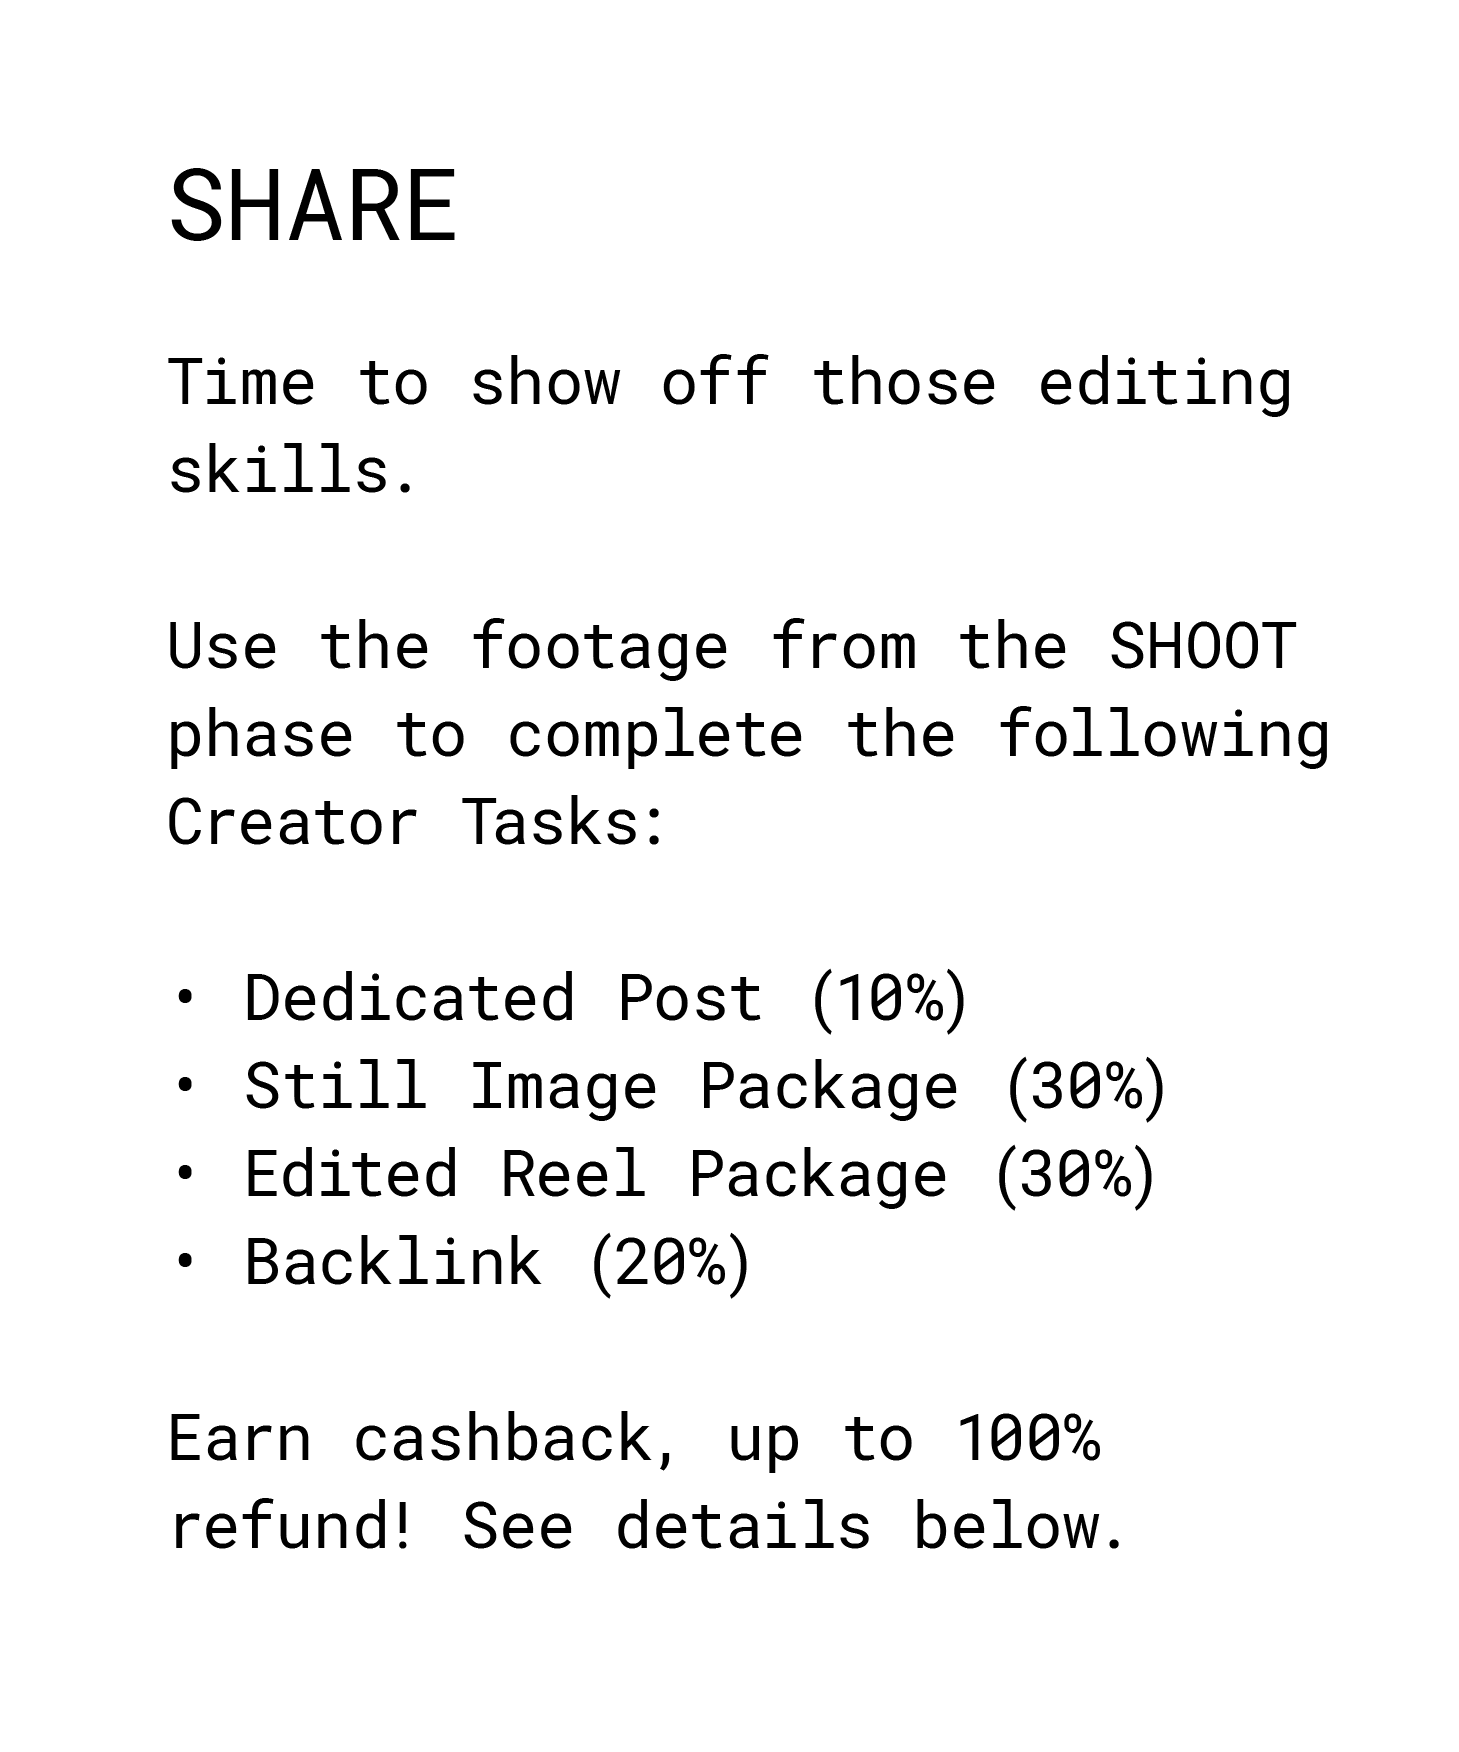 Share. Time to show off those editing skills. Use the footage from the SHOOT phase to complete the following Creator Tasks: Dedicated Post (10%) Still Image Package (30%) Edited Reel Package (30%) Backlink (20%) Earn cashback, up to 100% refund! See details below. 